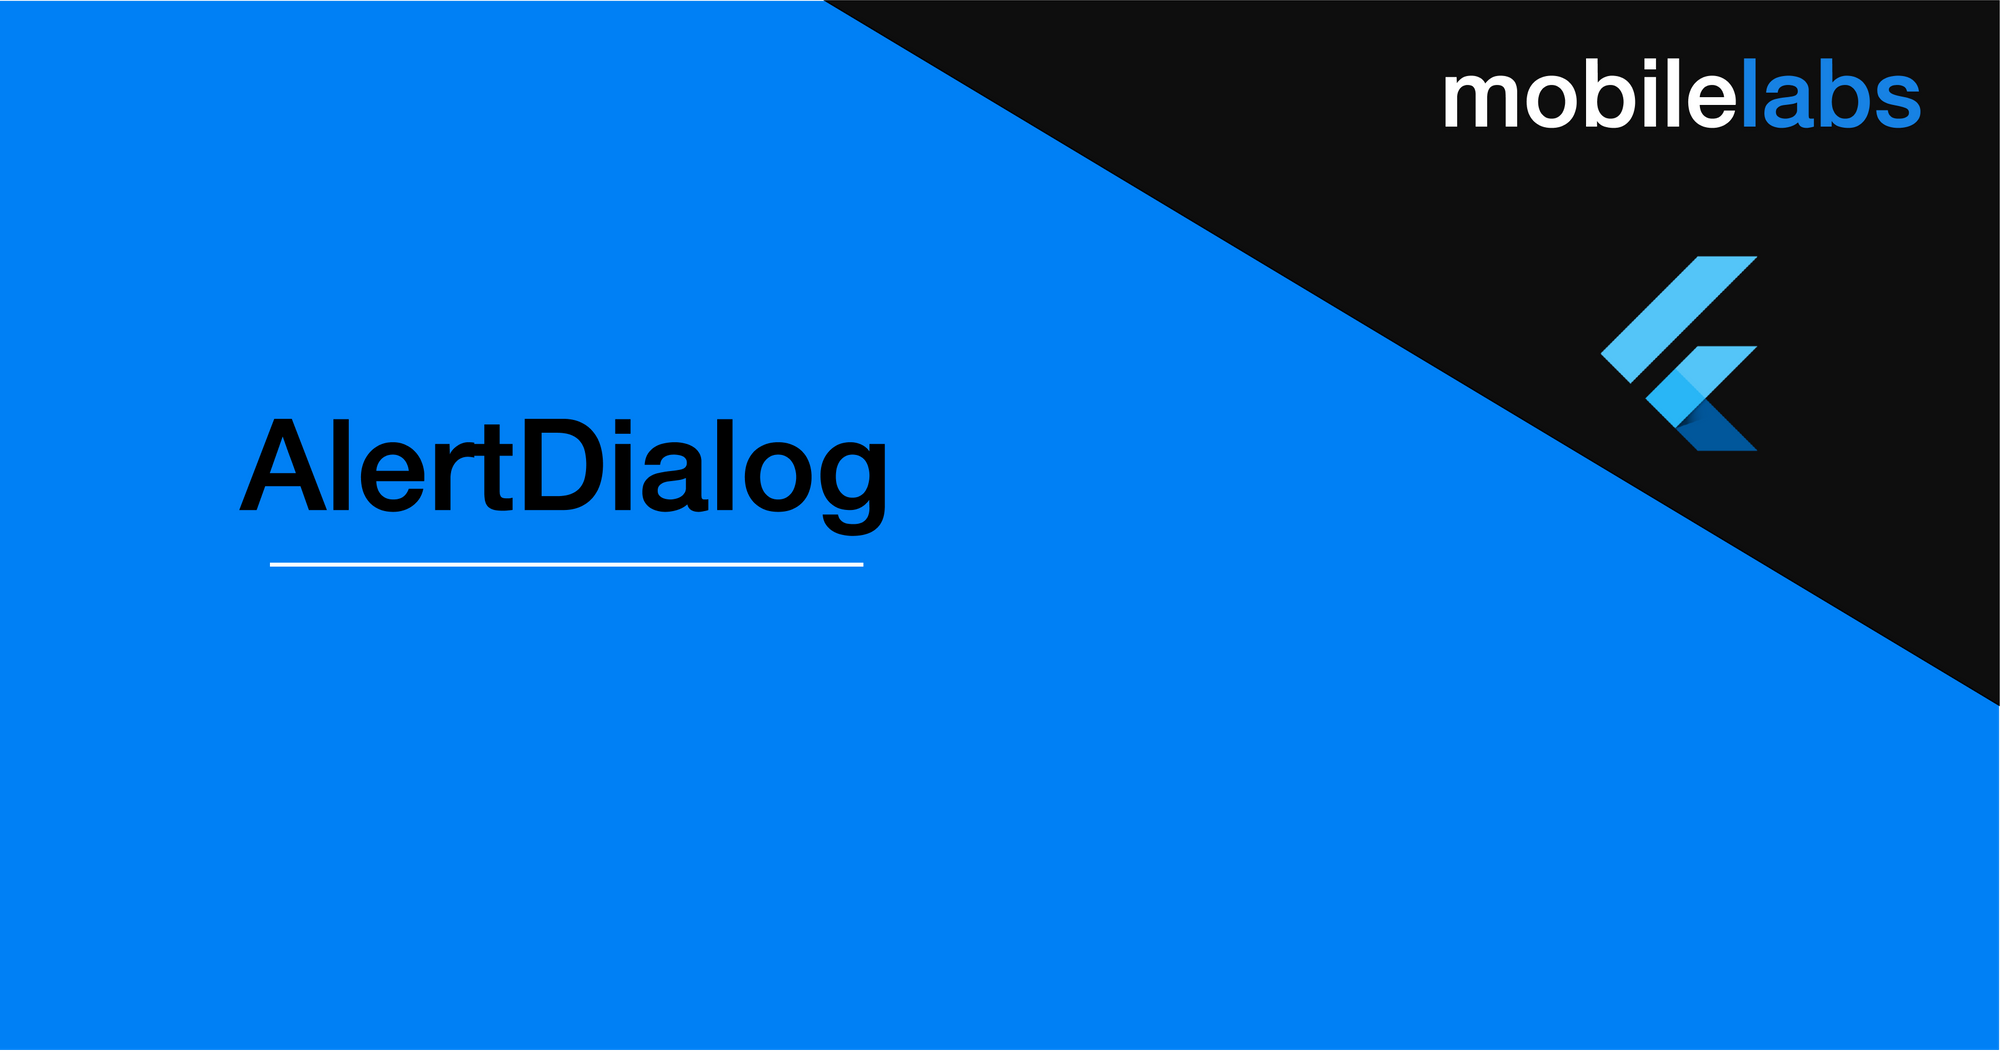 How to use AlertDialog?